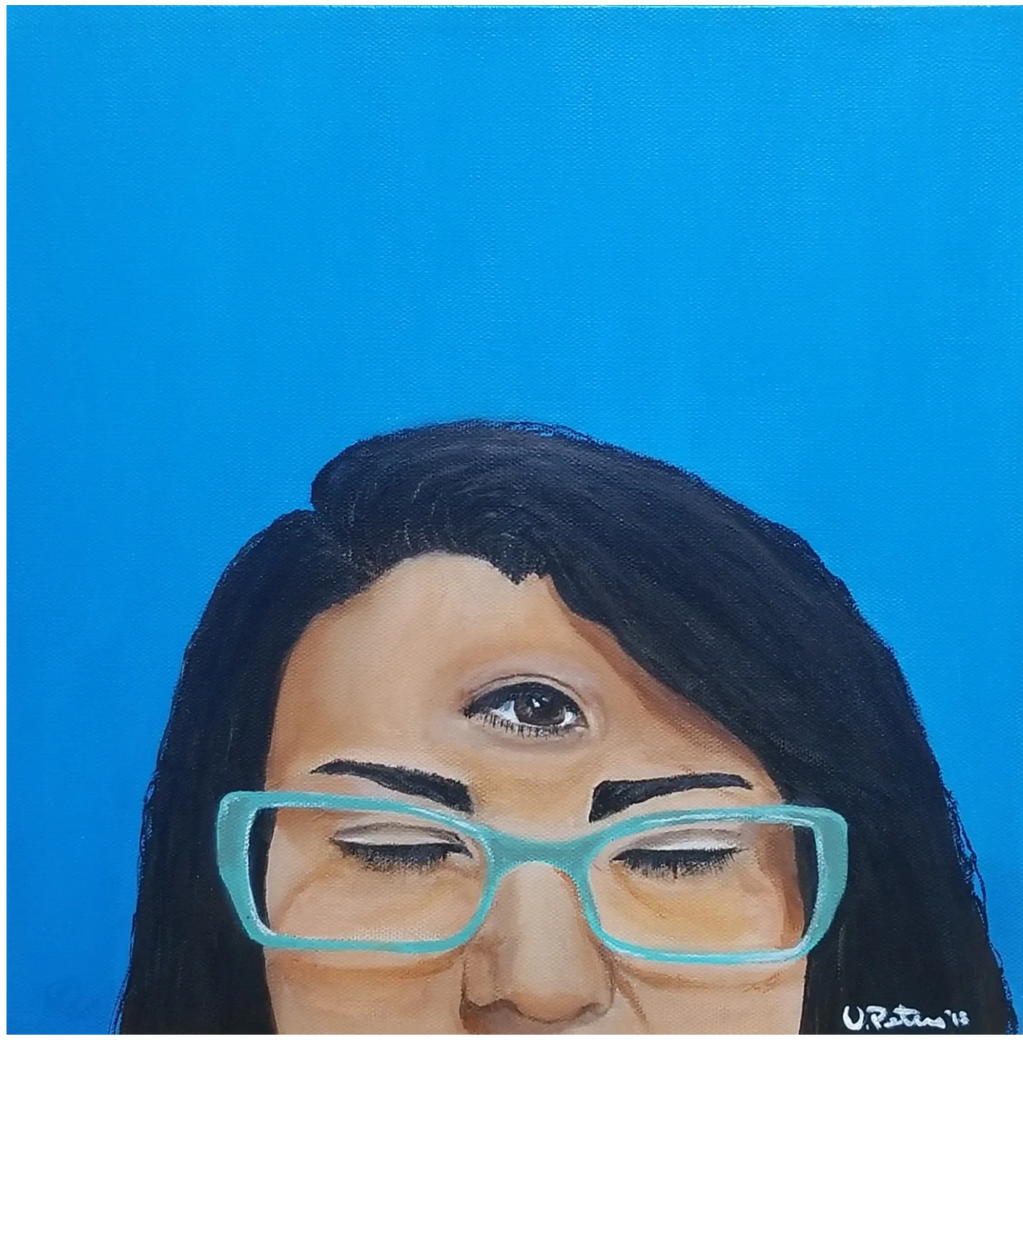 cerulean background  dark hair woman in teal glasses with eyes closed and open third eye on forehead